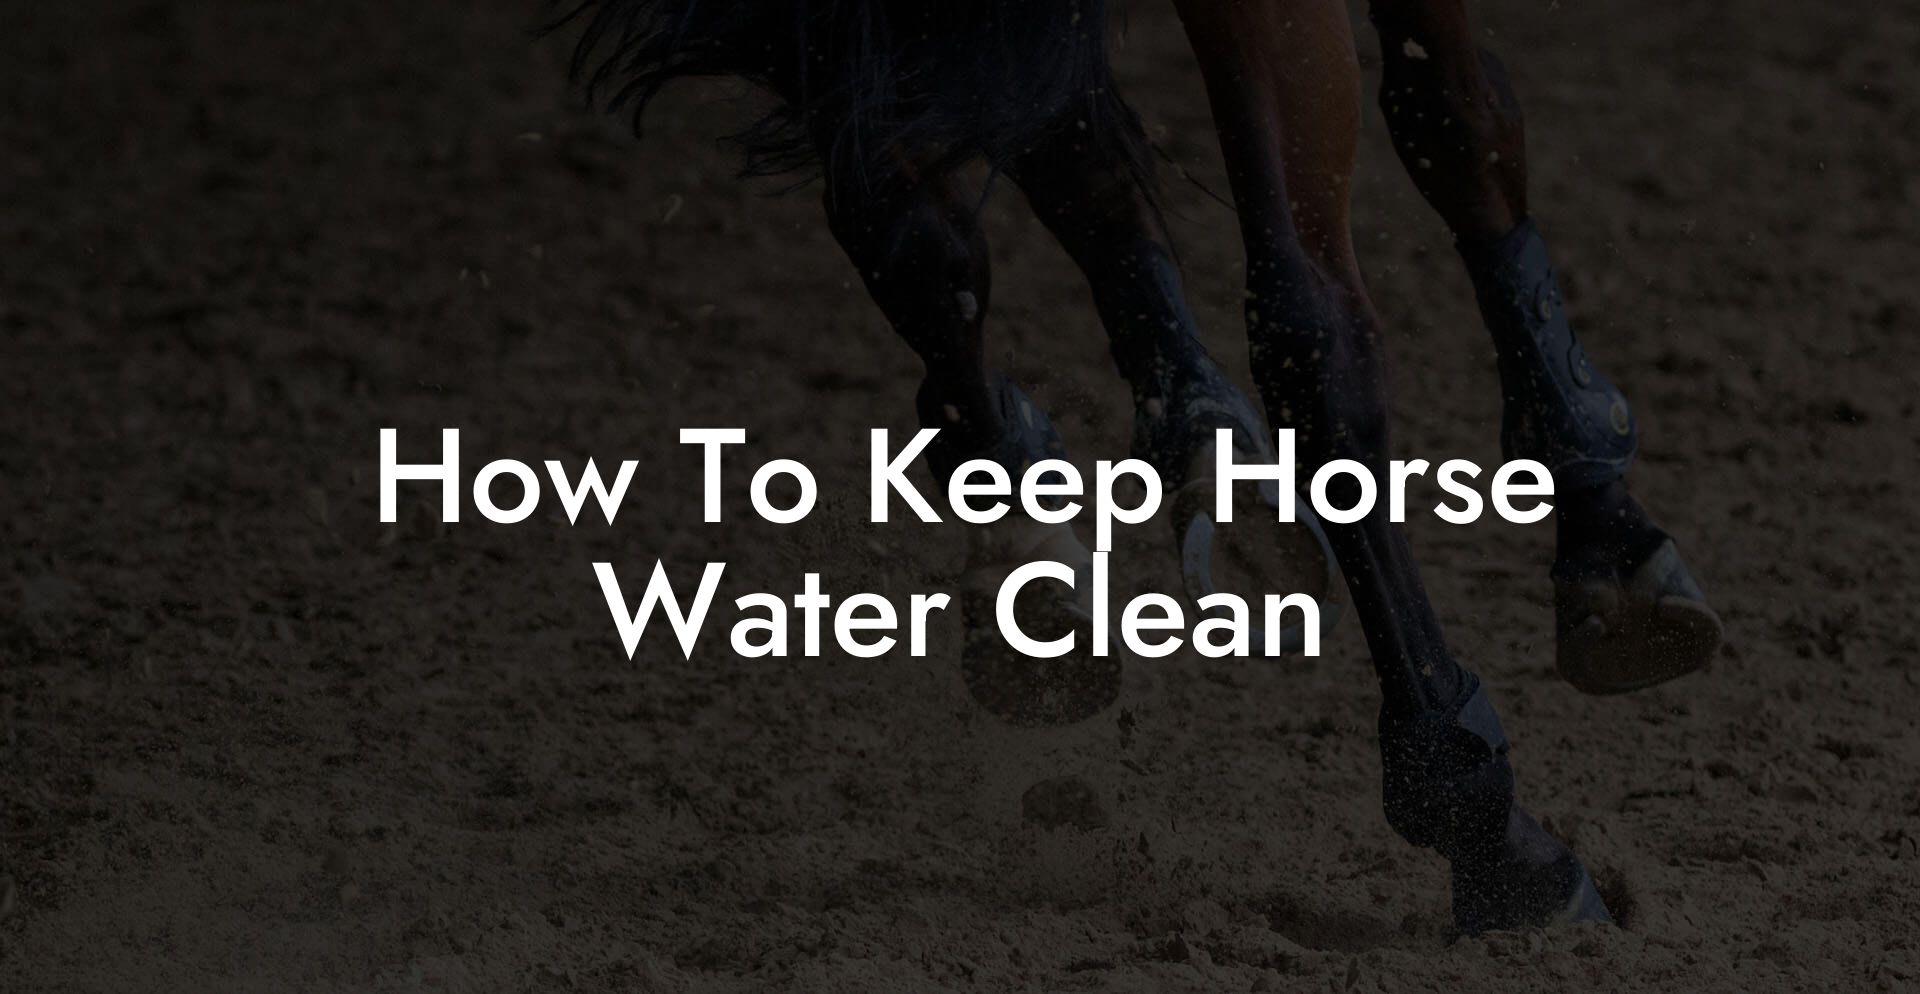 How To Keep Horse Water Clean